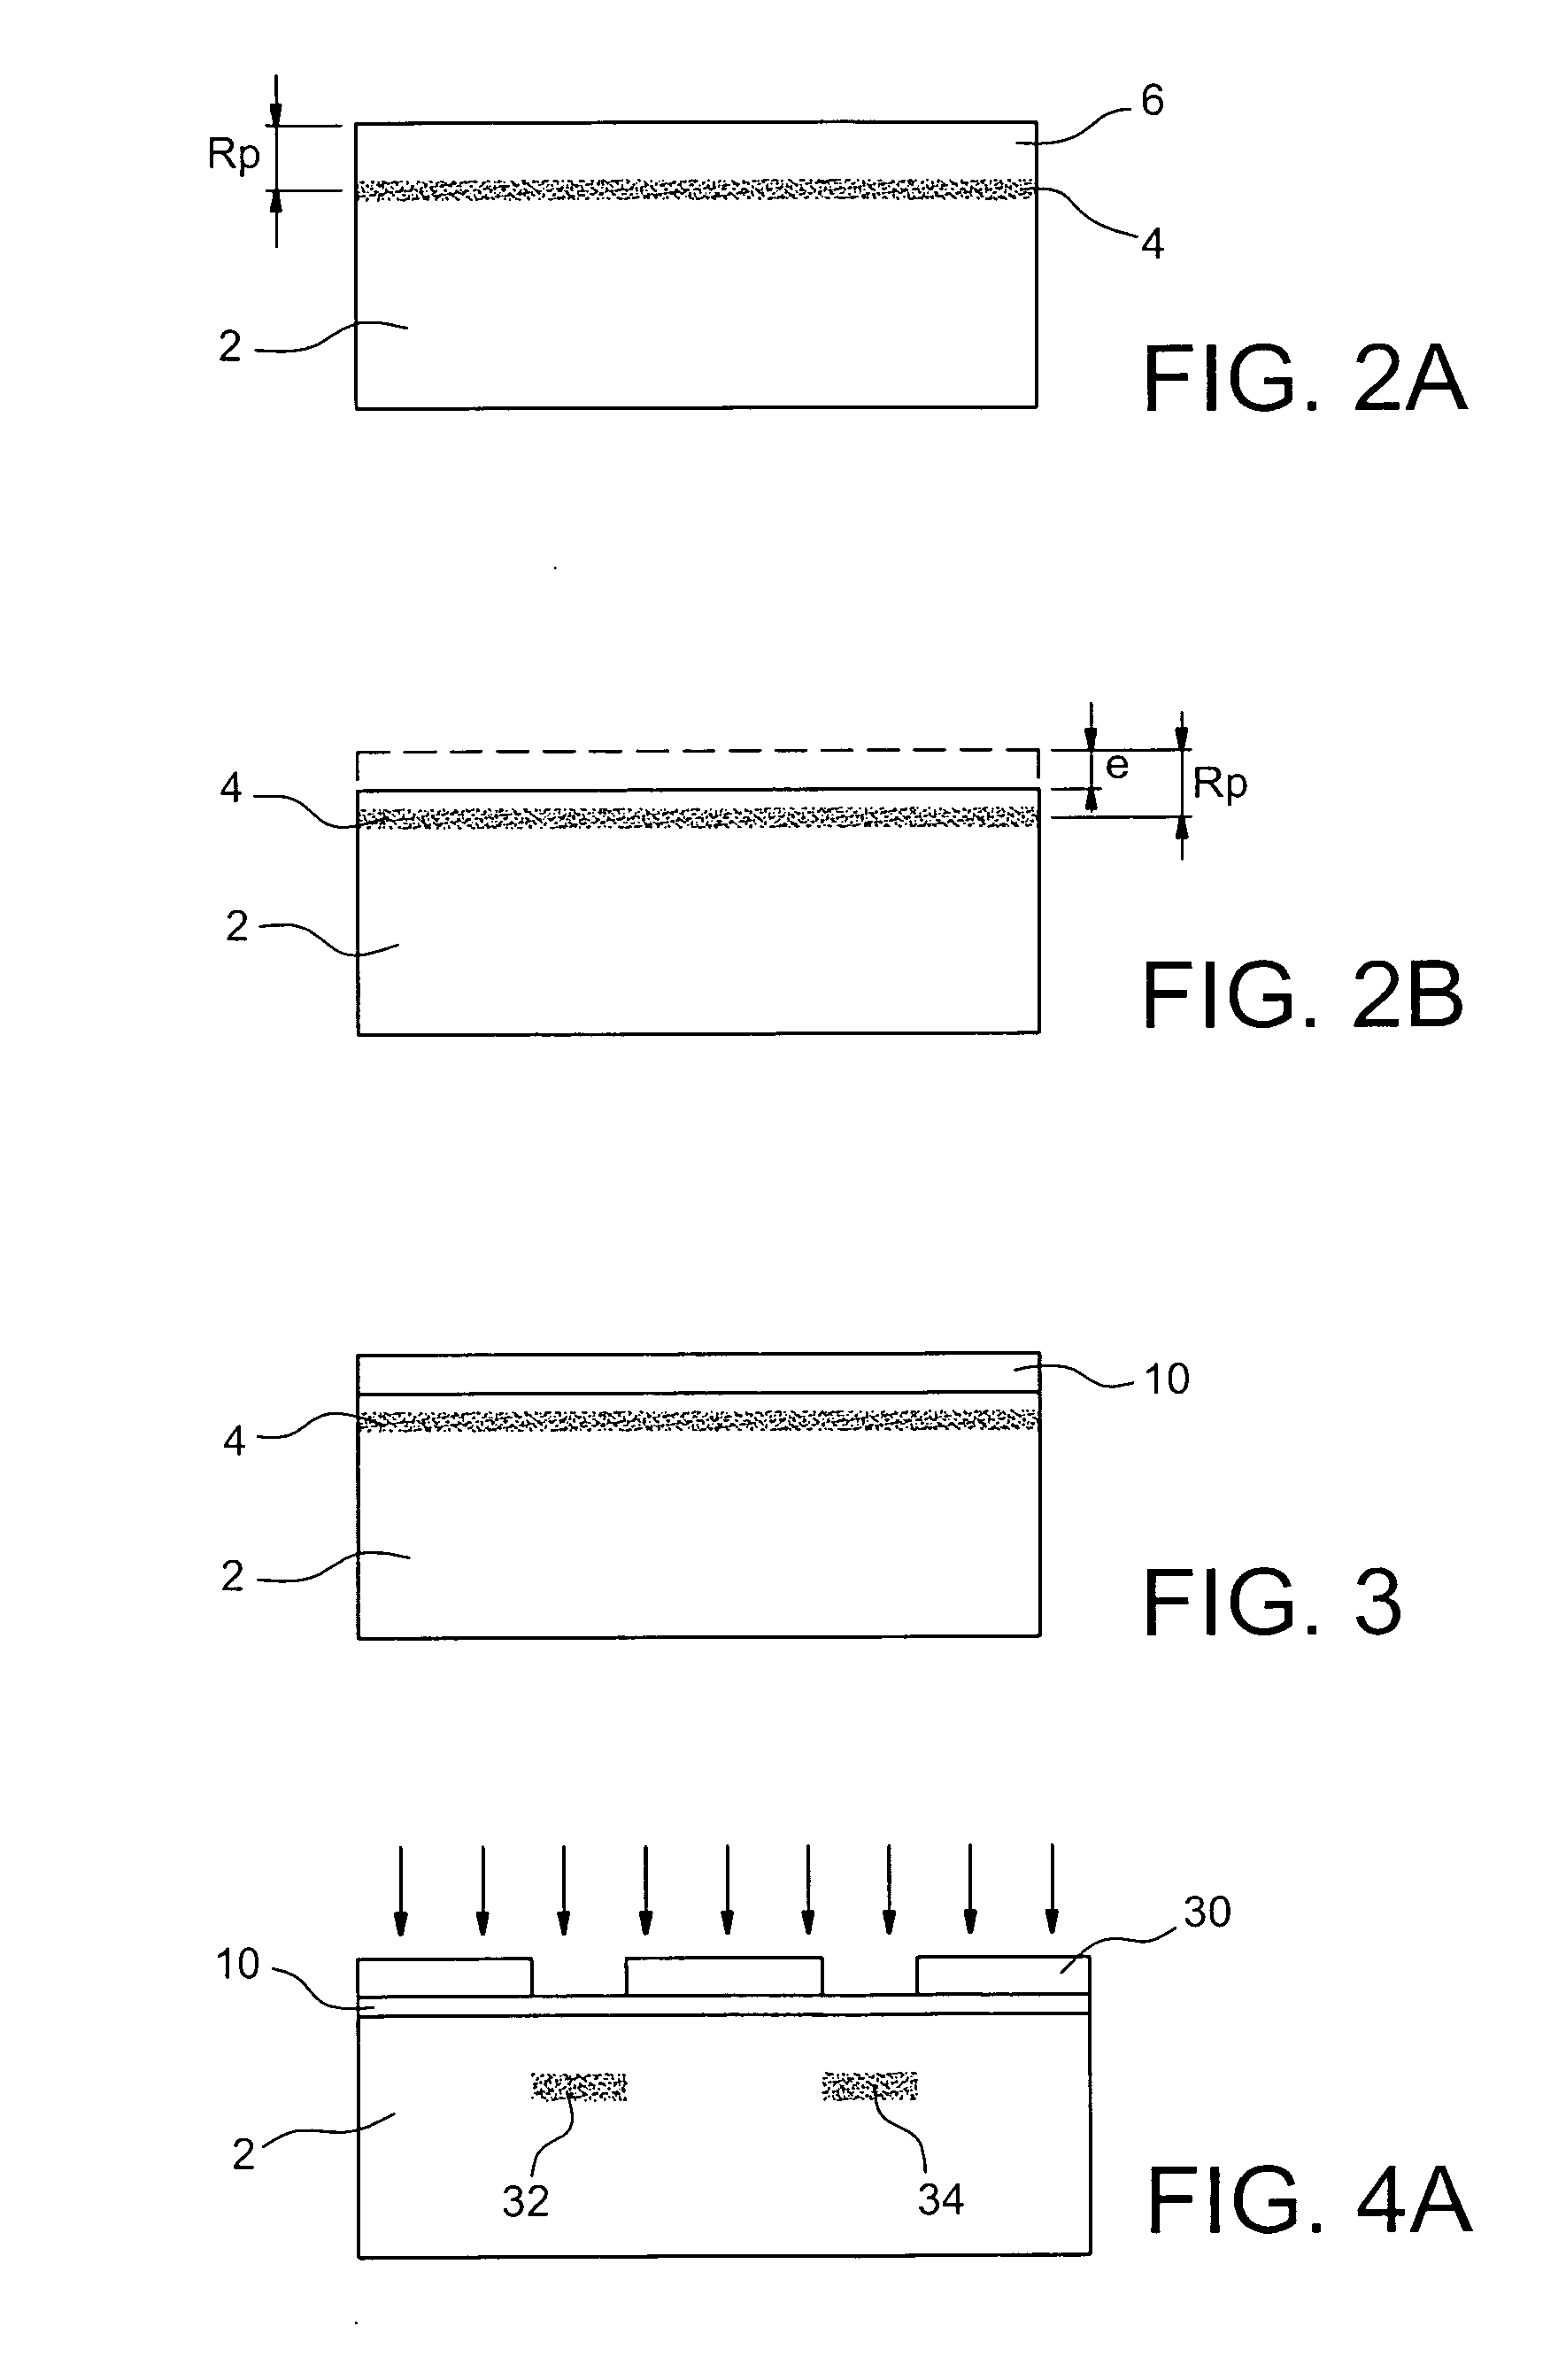 Method of sealing two plates with the formation of an ohmic contact therebetween